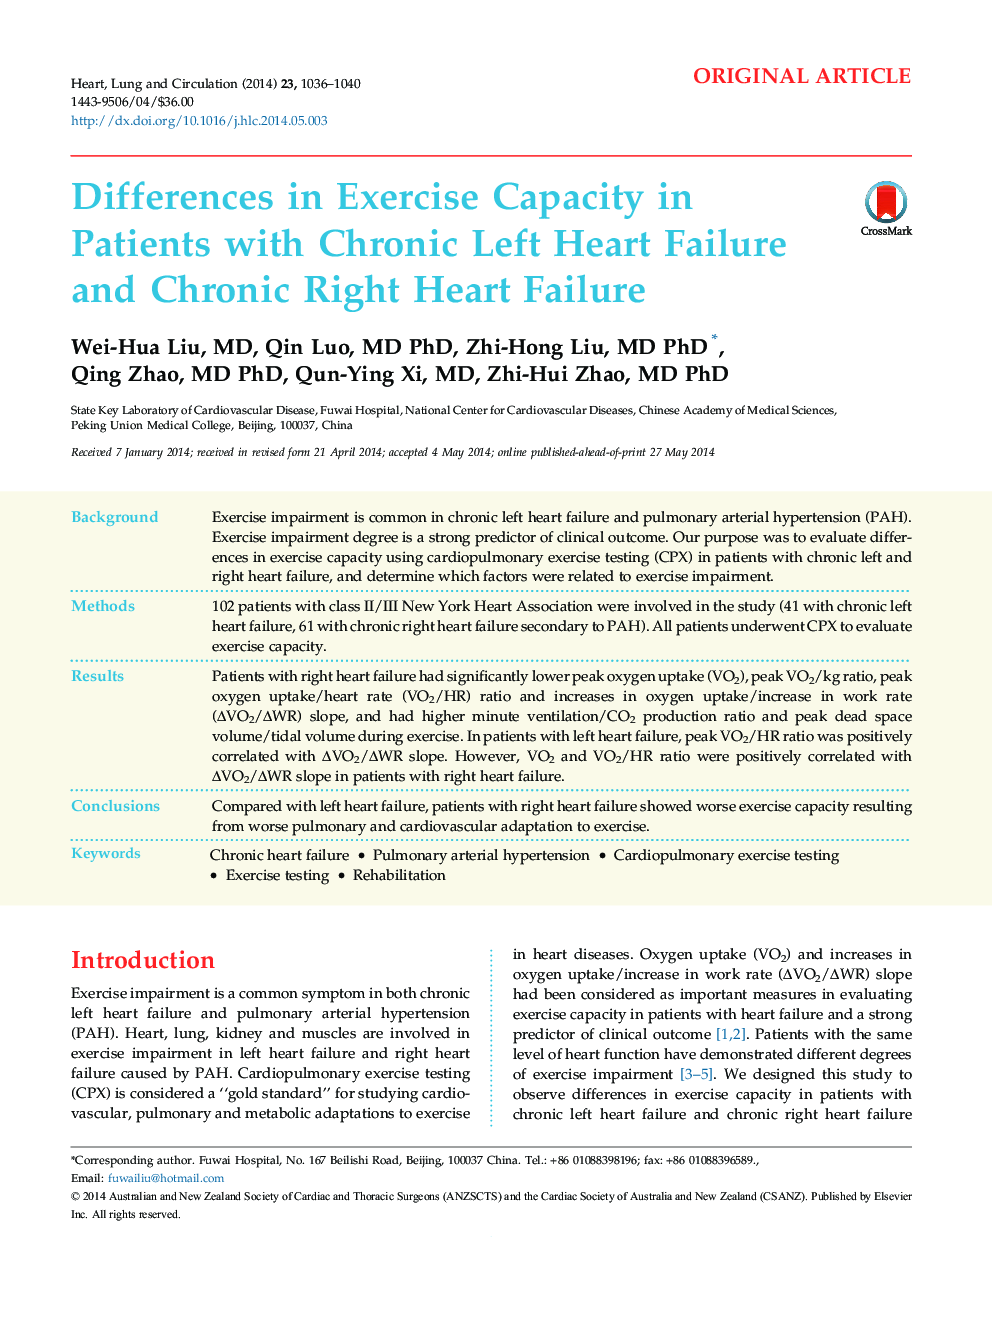 Differences in Exercise Capacity in Patients with Chronic Left Heart Failure and Chronic Right Heart Failure